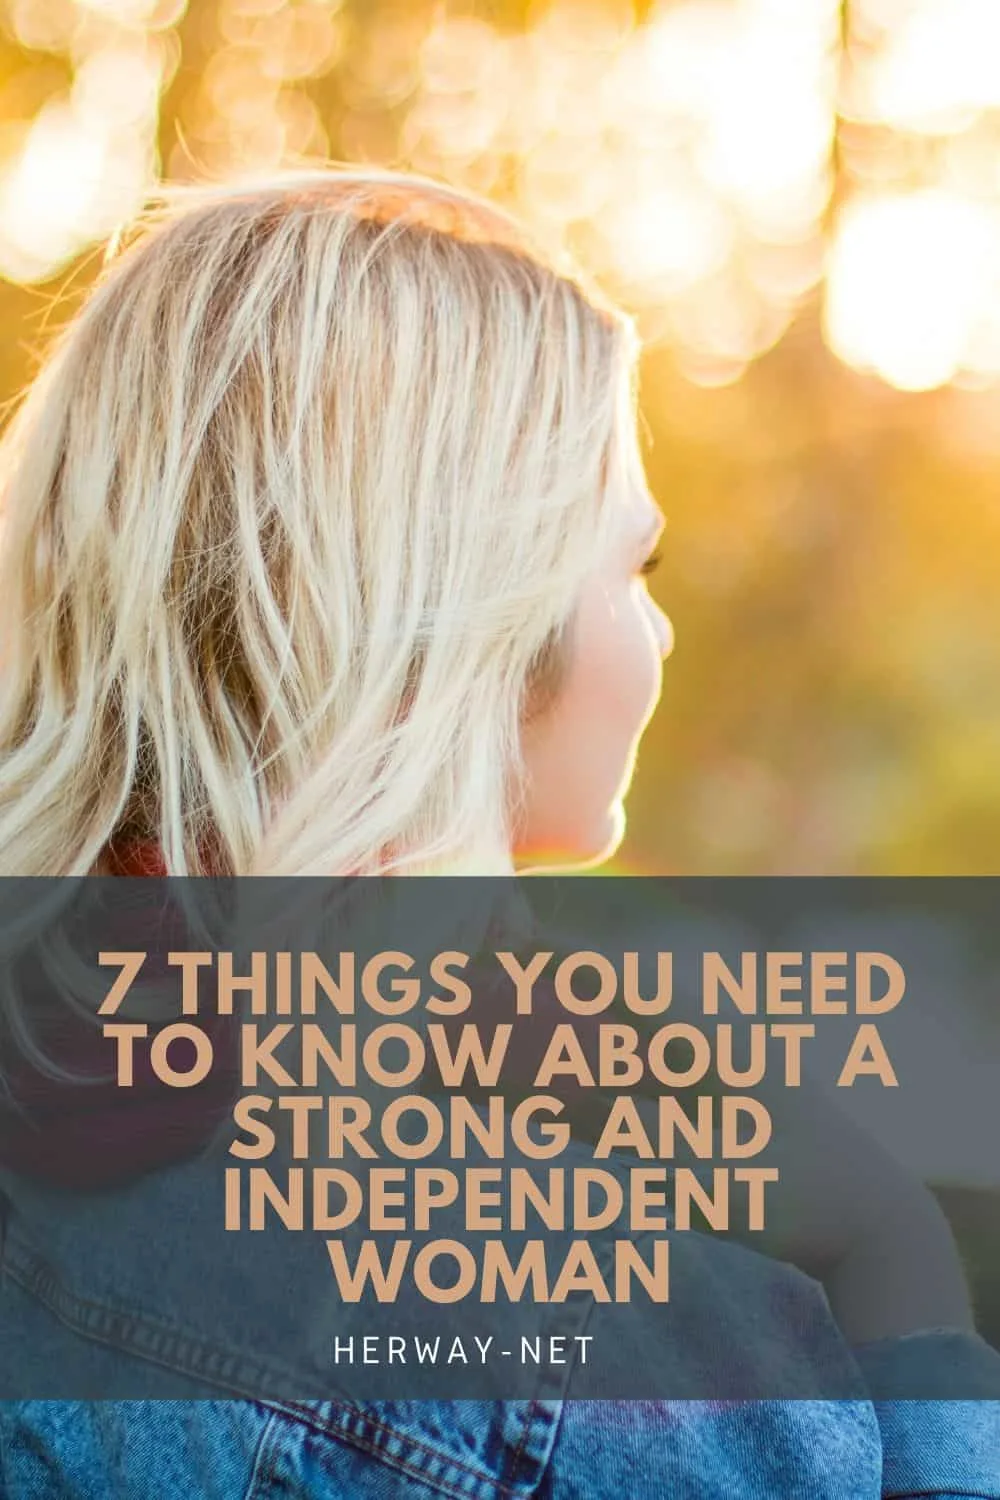 7 Things You Need To Know About A Strong And Independent Woman